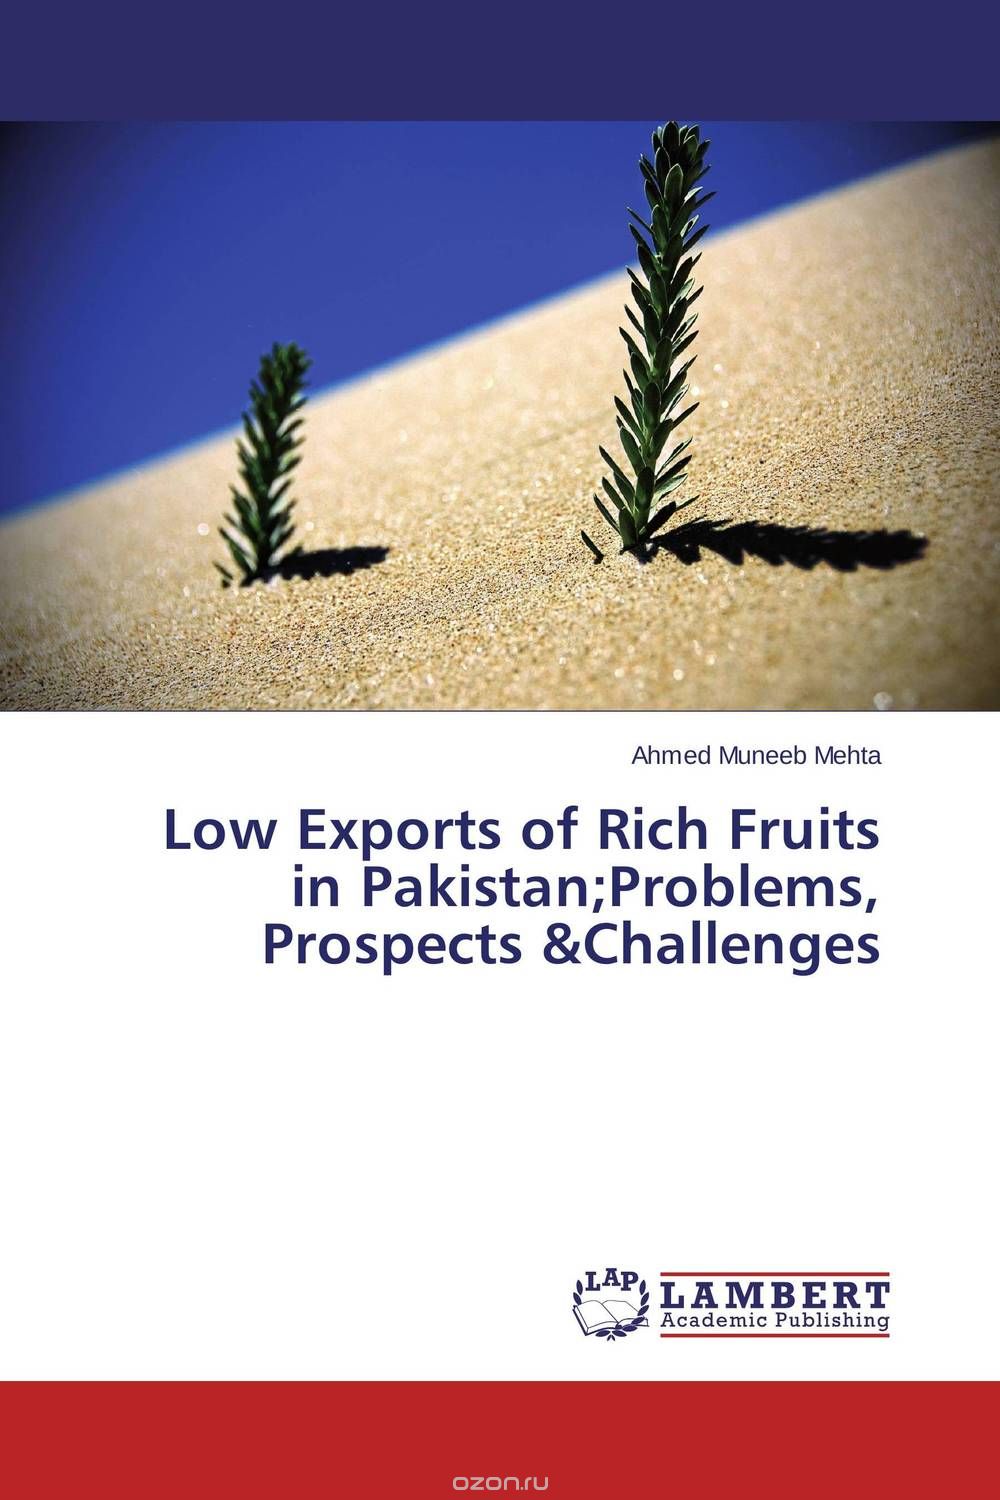 Скачать книгу "Low Exports of Rich Fruits in Pakistan;Problems, Prospects &Challenges"